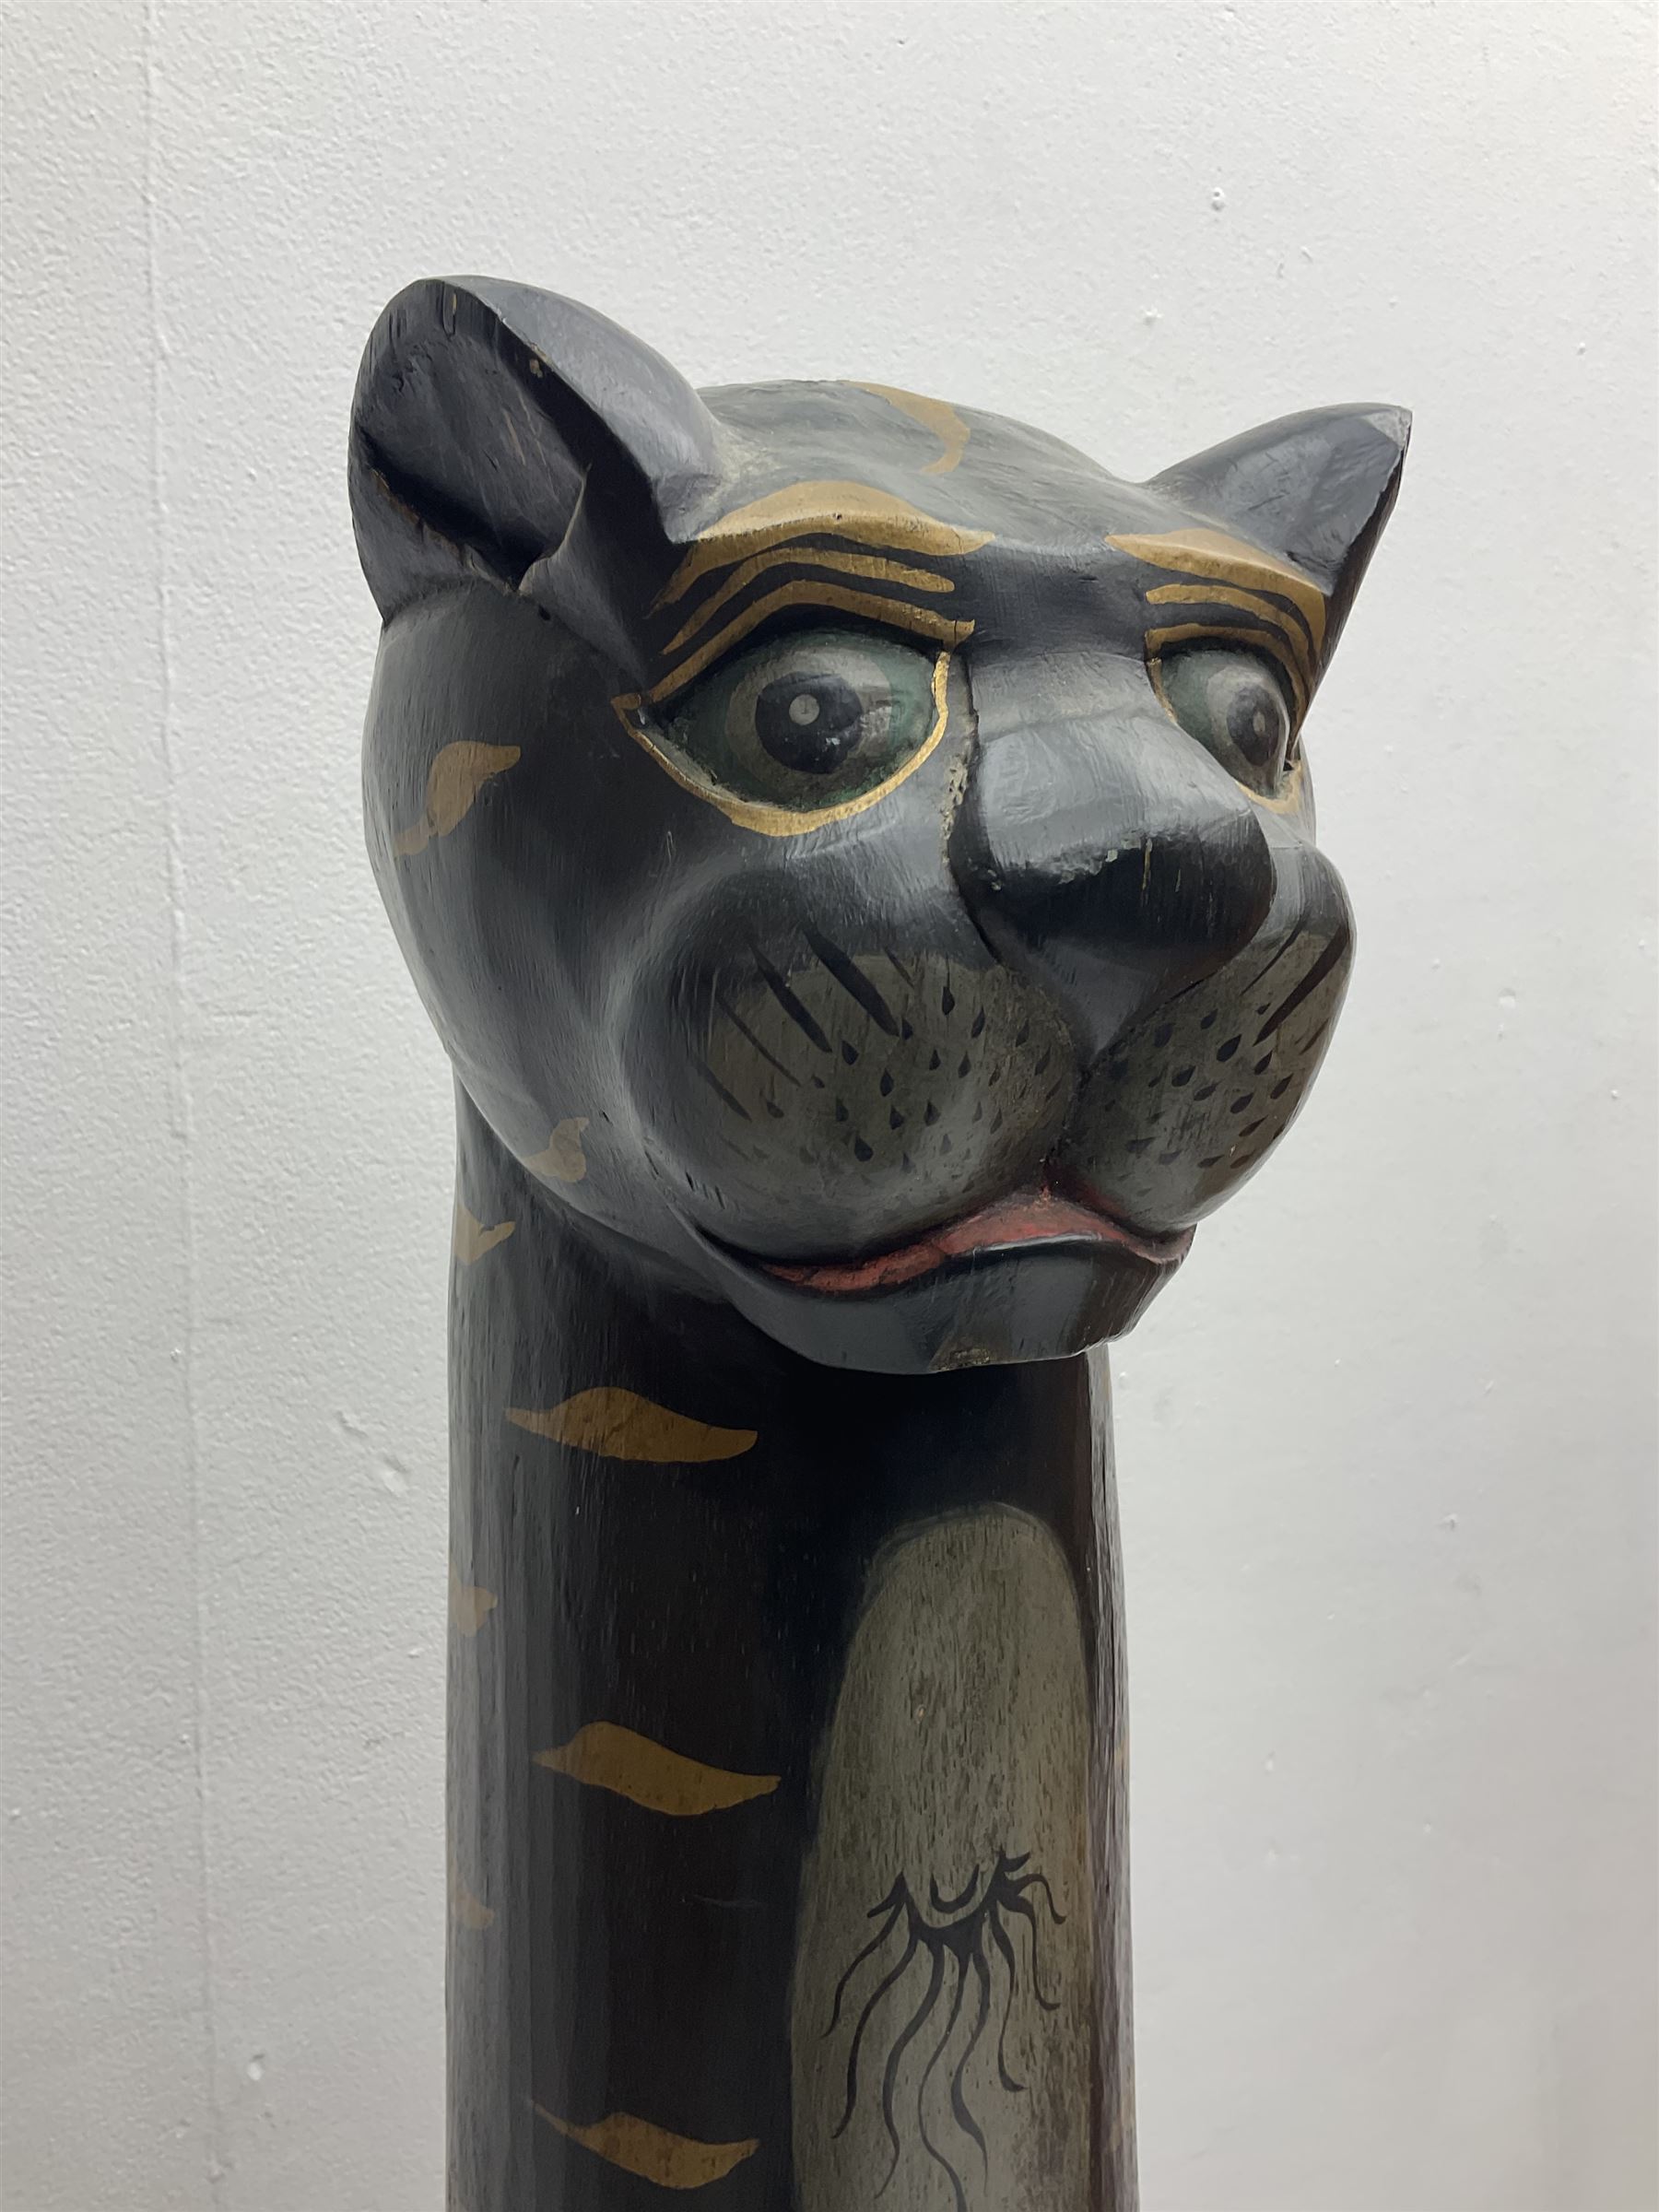 Large wood figure of a black cat with Egyptian style and gilt decoration - Image 3 of 11